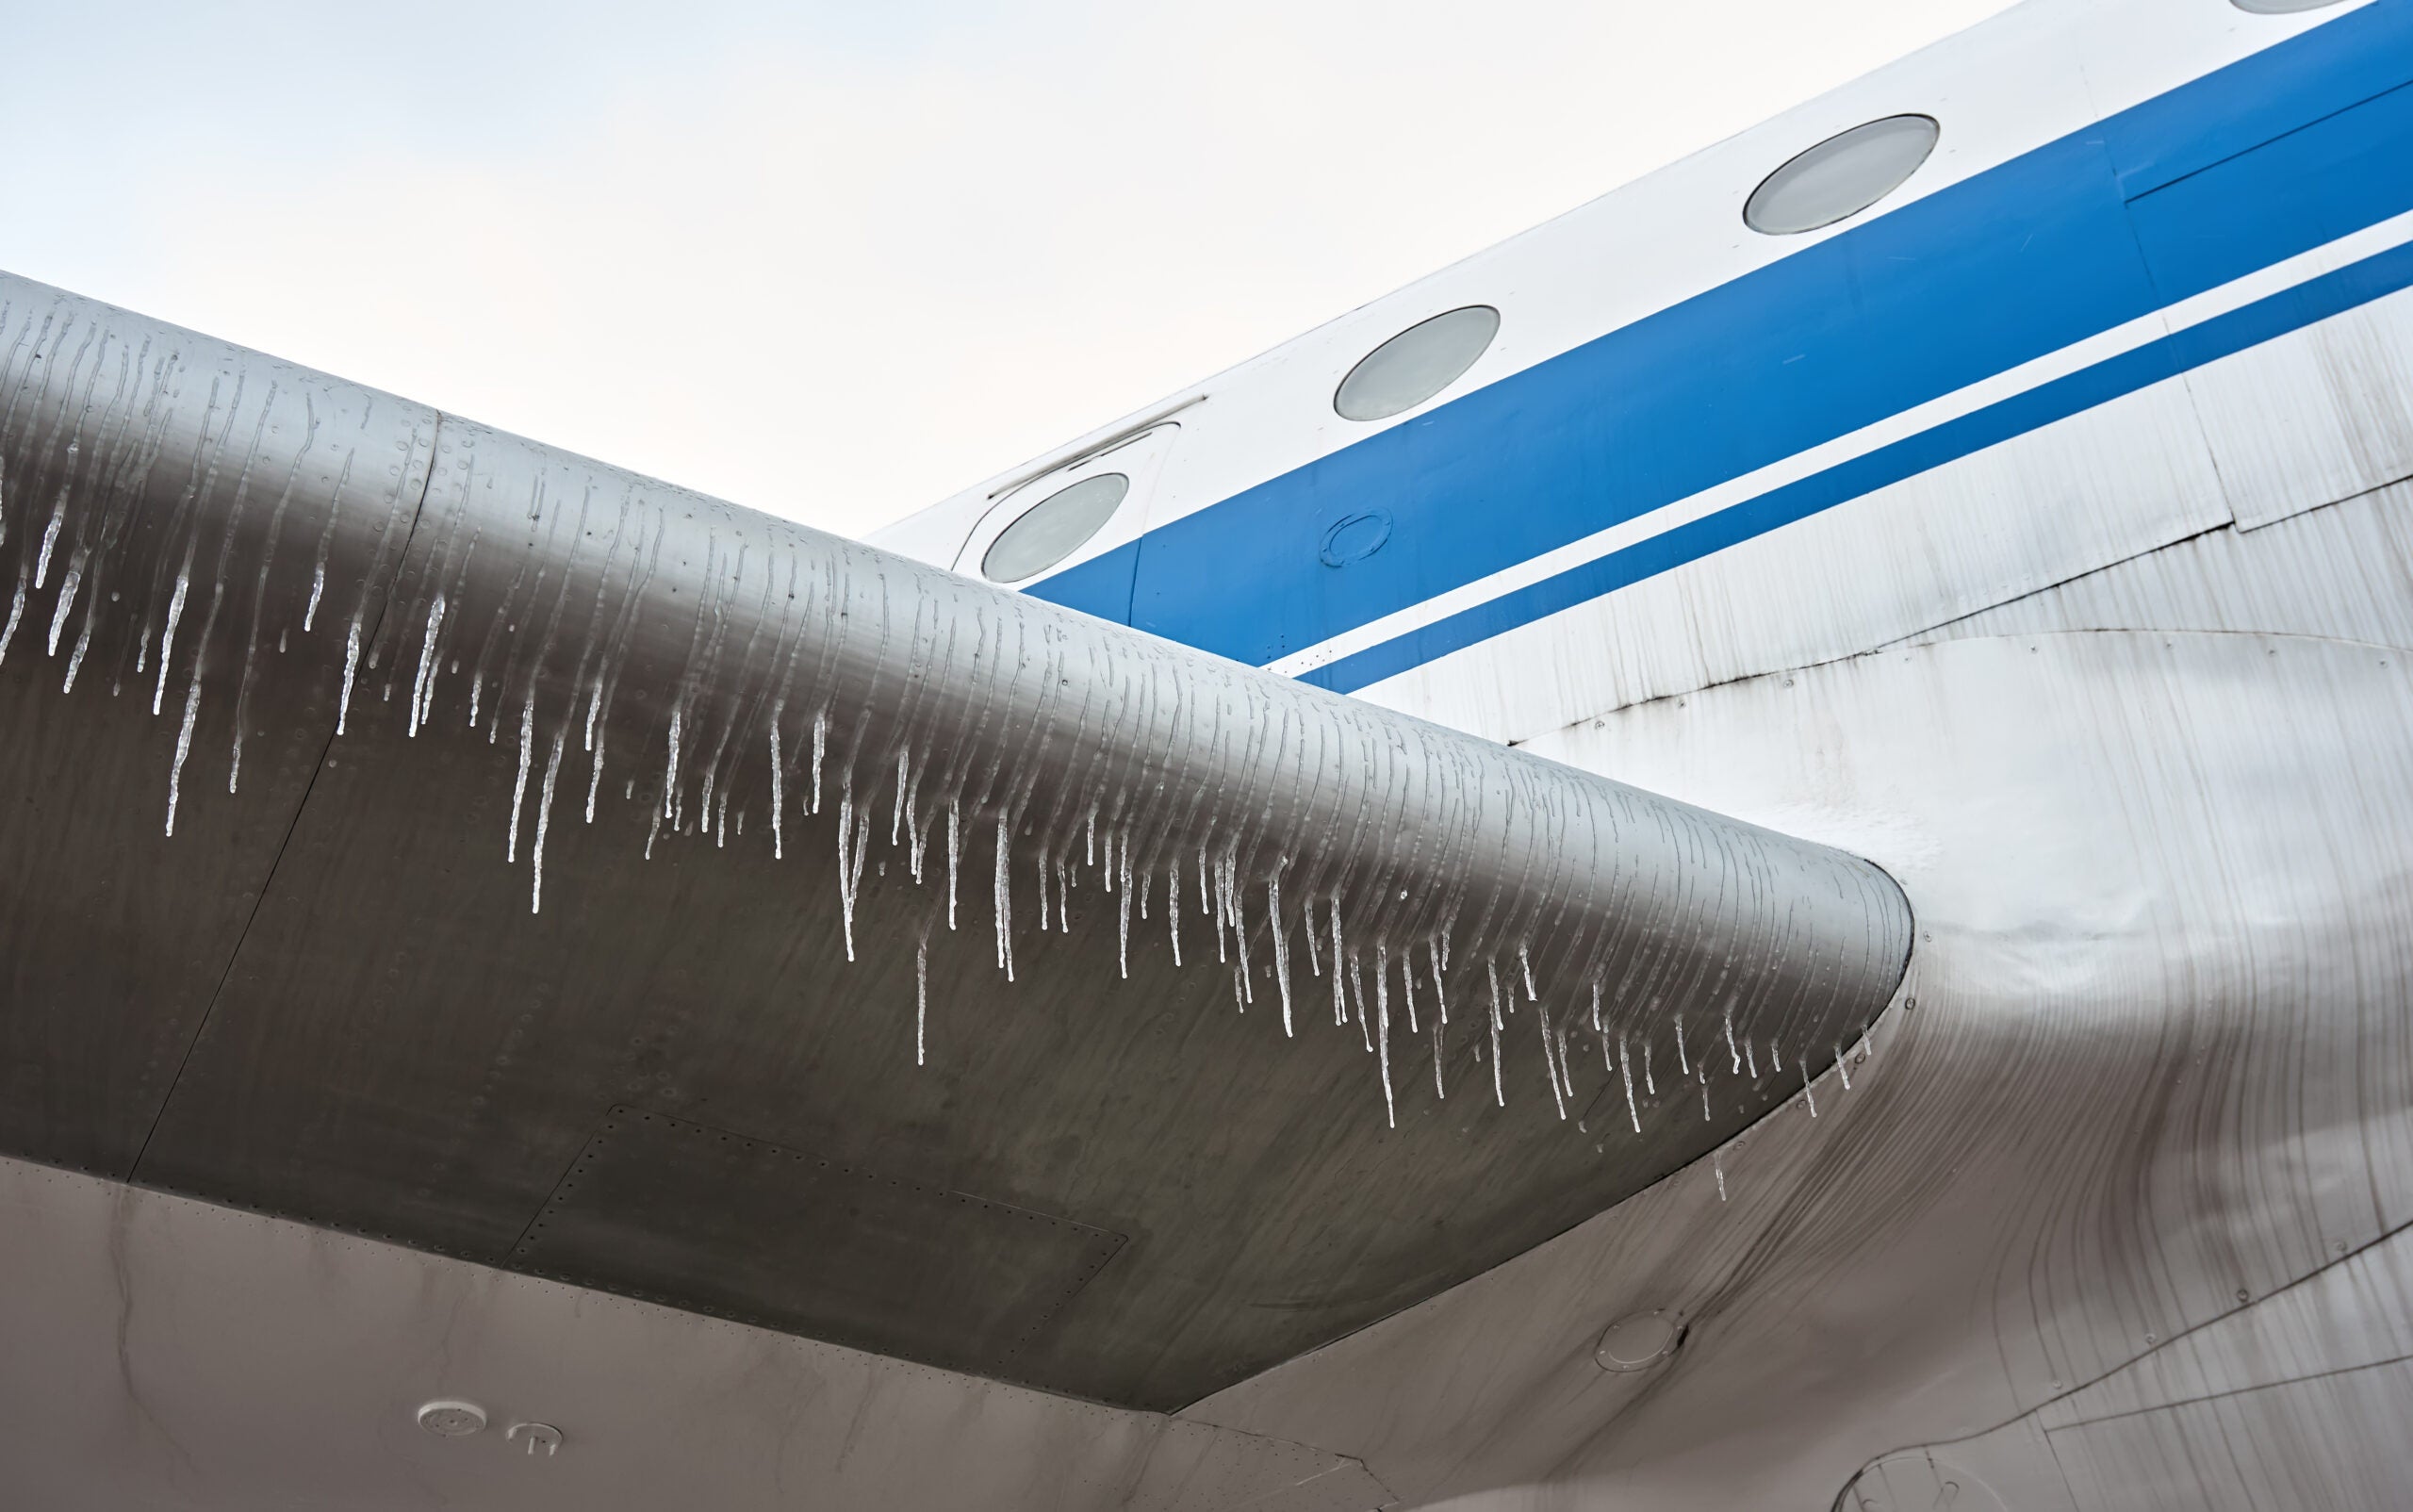 How Does Ice Affect Your Aircraft?